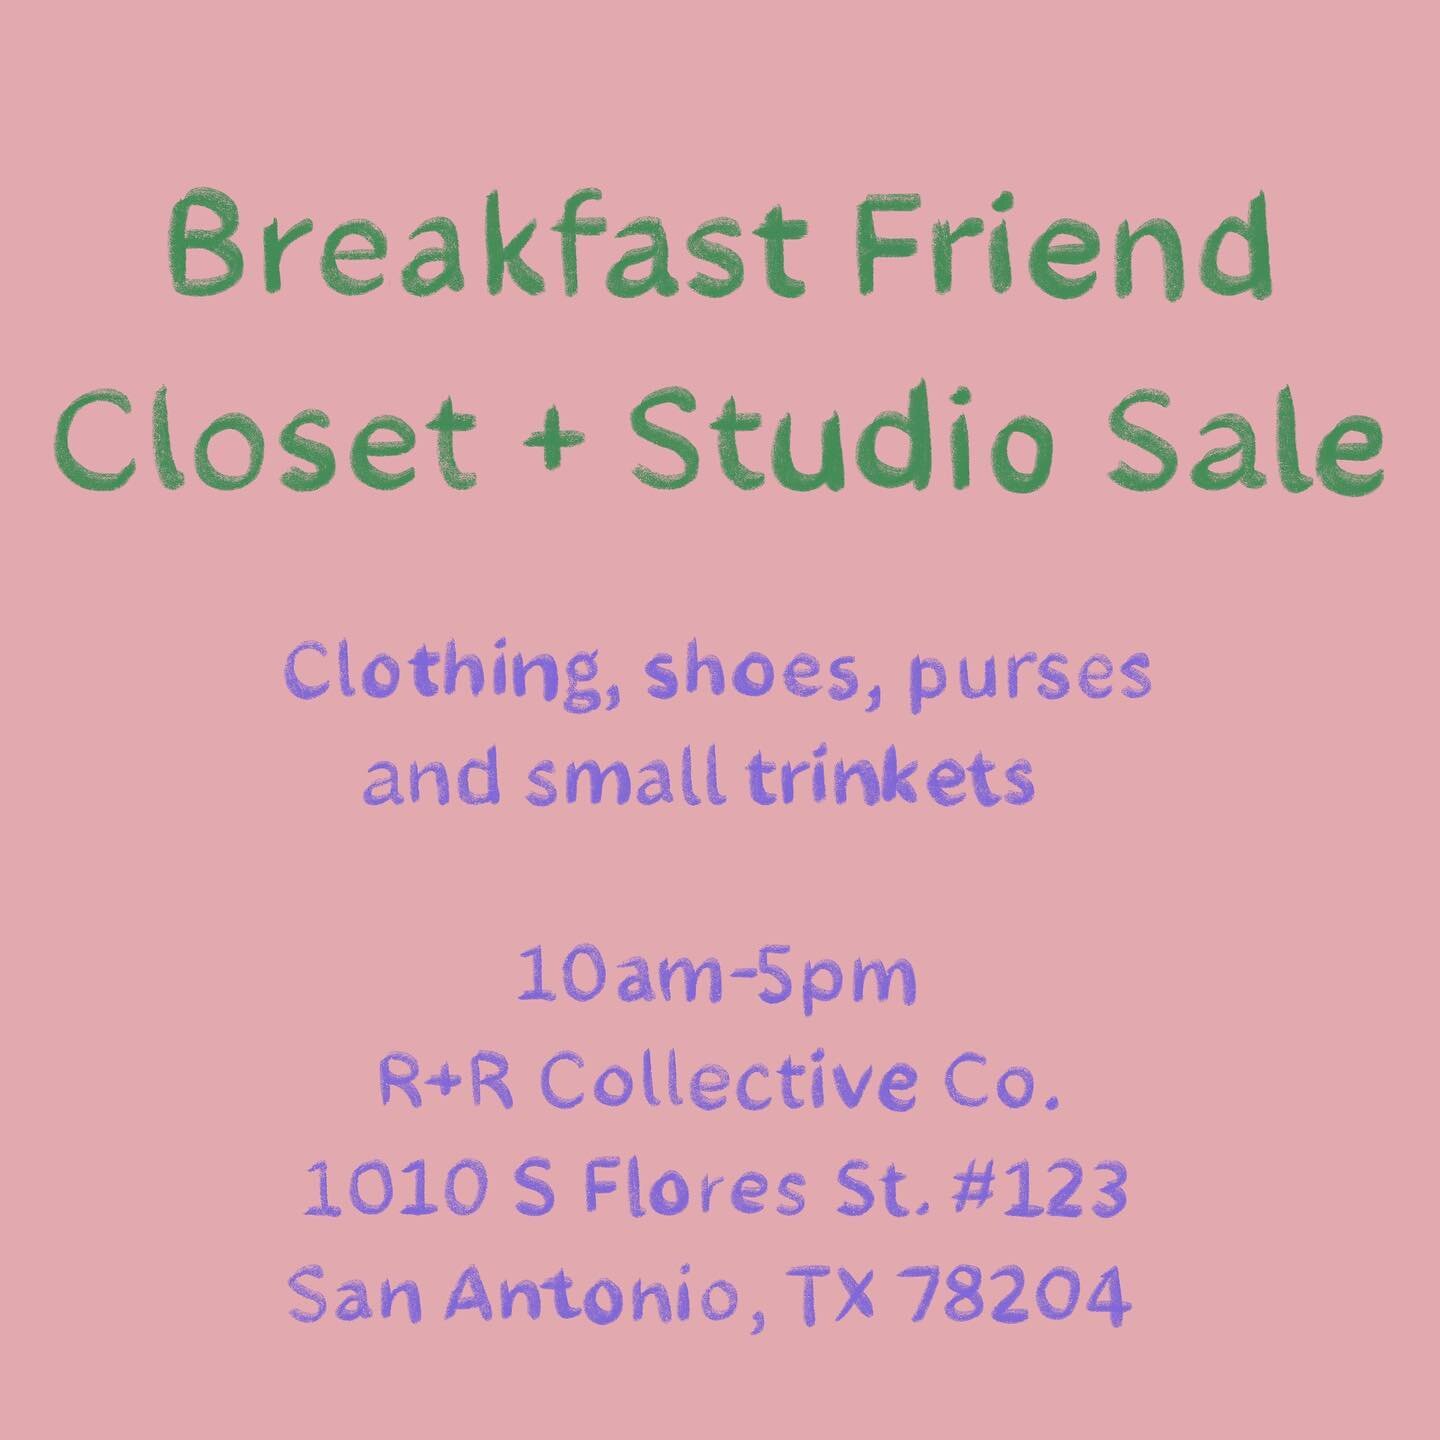 Join us this Saturday for our first ever &ldquo;Breakfast Friend Closet + Studio Sale&rdquo;!

Lots of cute items will be available, so come on over and enjoy a matcha with us ❤️🦋🍓